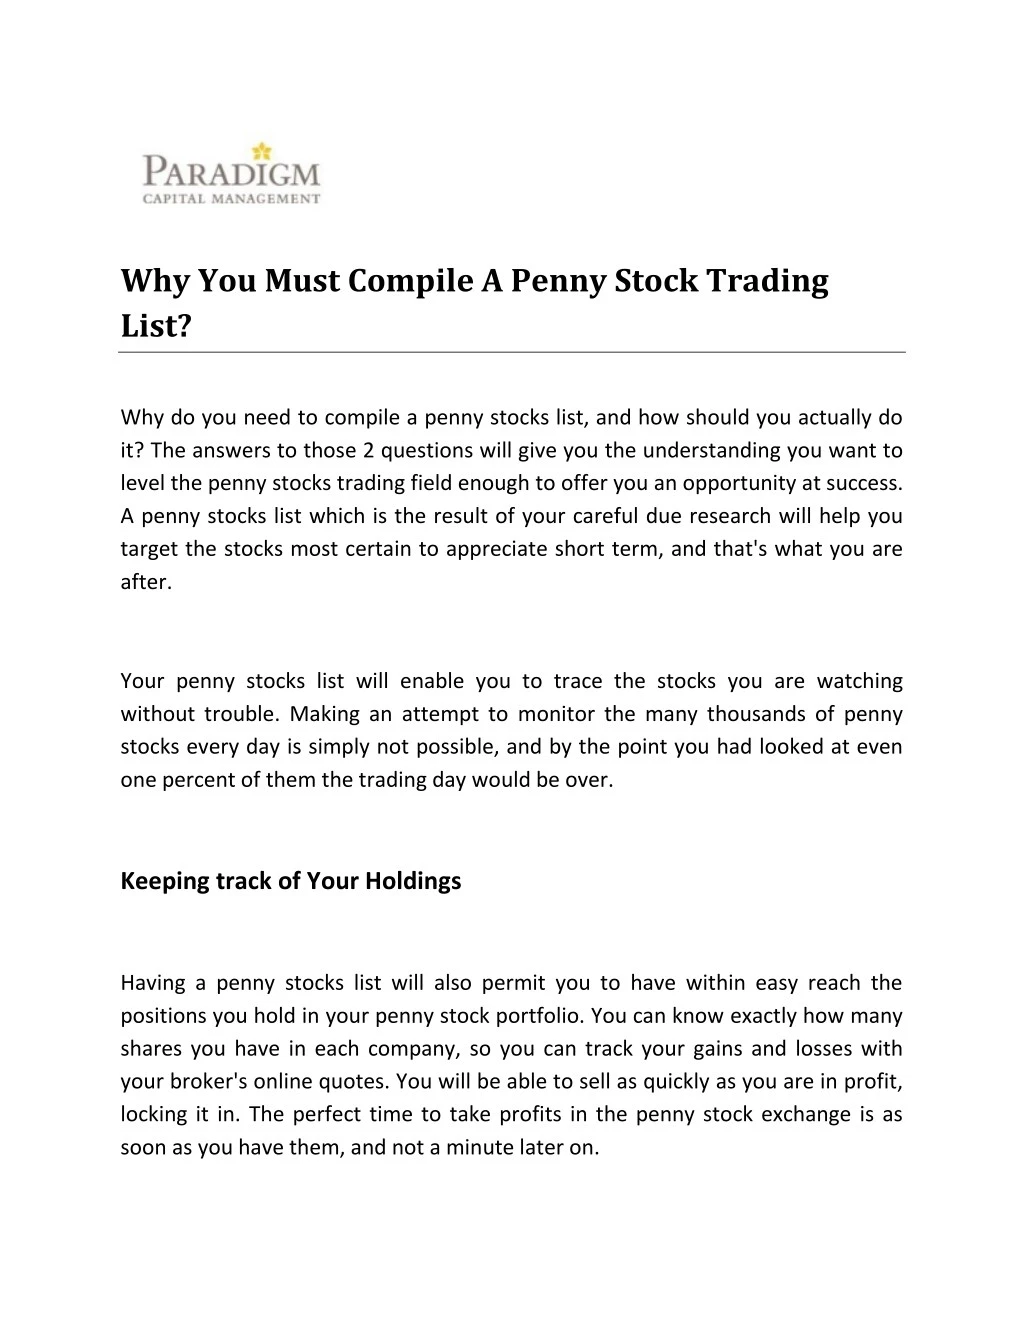 why you must compile a penny stock trading list